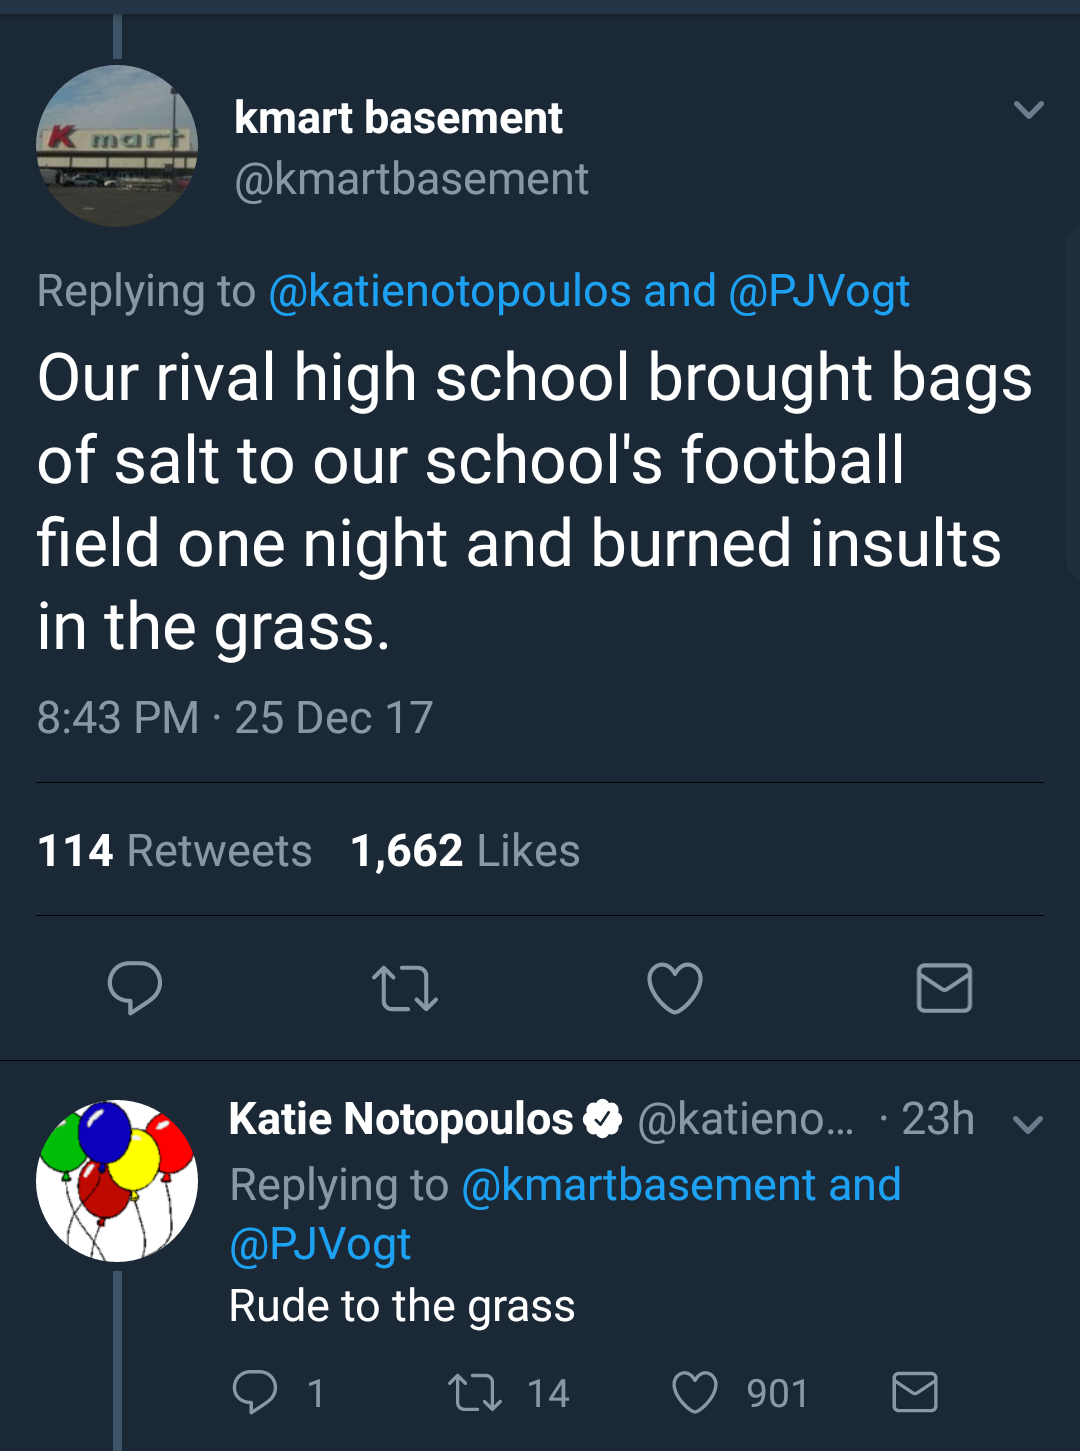 Kmart kmart basement and Our rival high school brought bags of salt to our school's football field one night and burned insults in the grass. 25 Dec 17 114 1,662 22 Katie Notopoulos ... 23h v and Rude to the grass 9 1 22 14 901